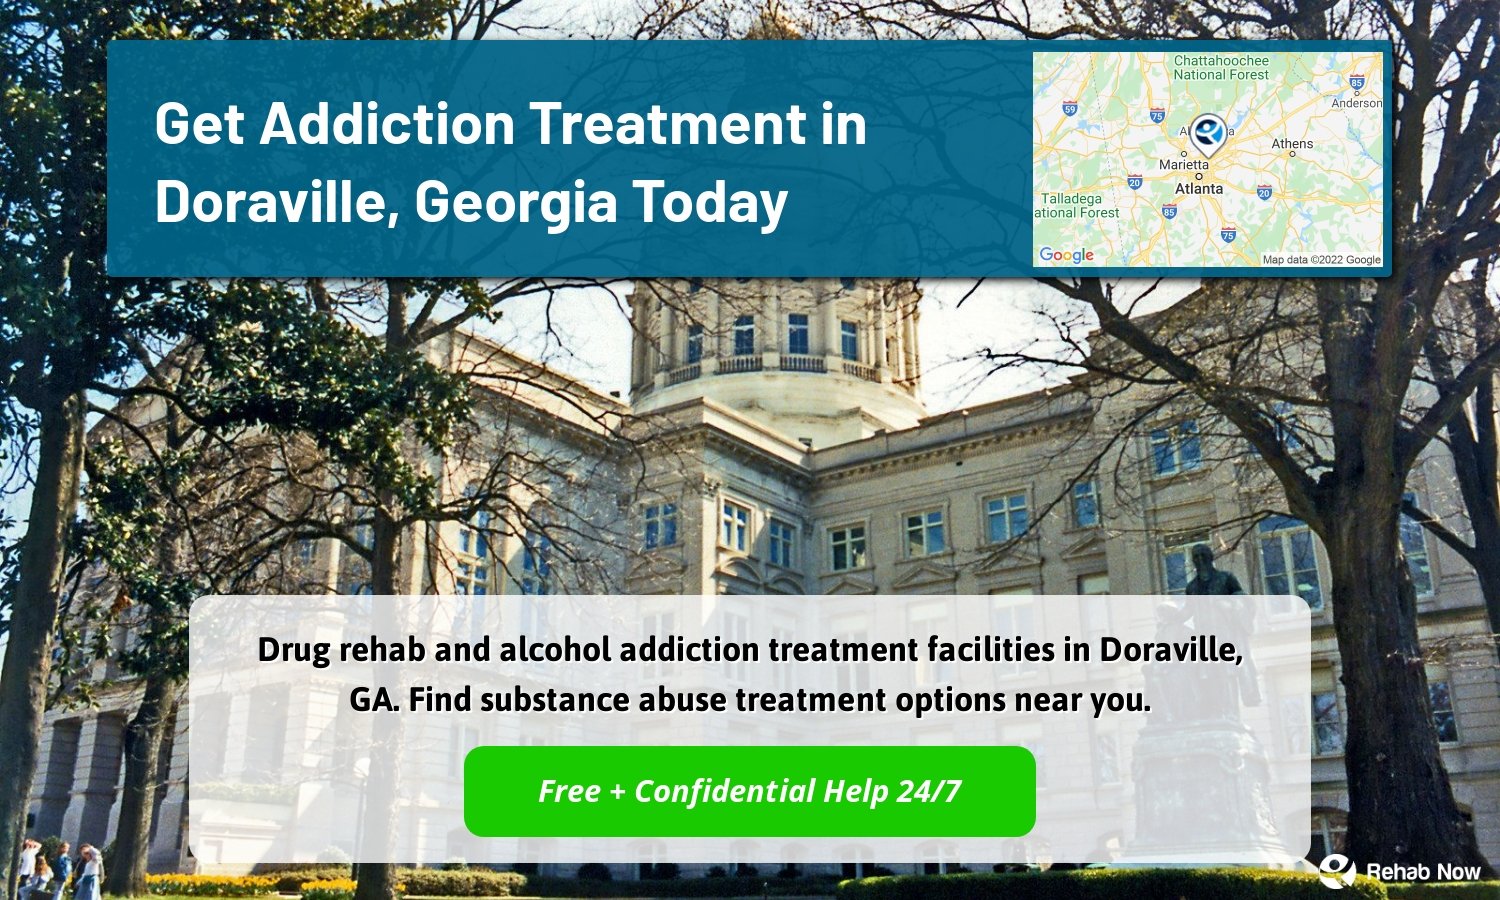 Drug rehab and alcohol addiction treatment facilities in Doraville, GA. Find substance abuse treatment options near you.